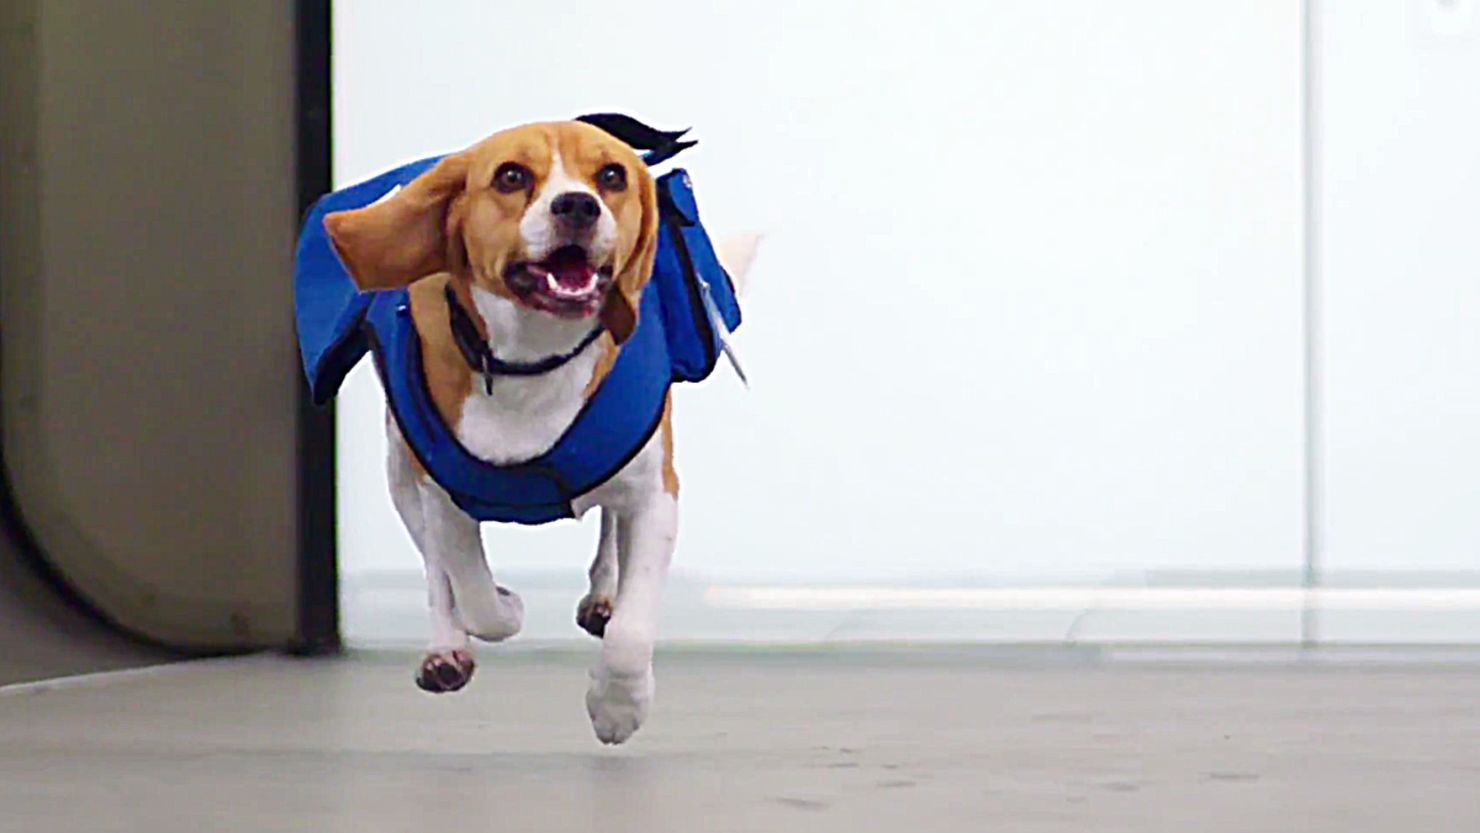 Sherlock on the case: KLM pooch solves mysteries, wins hearts at Amsterdam Airport Schiphol.